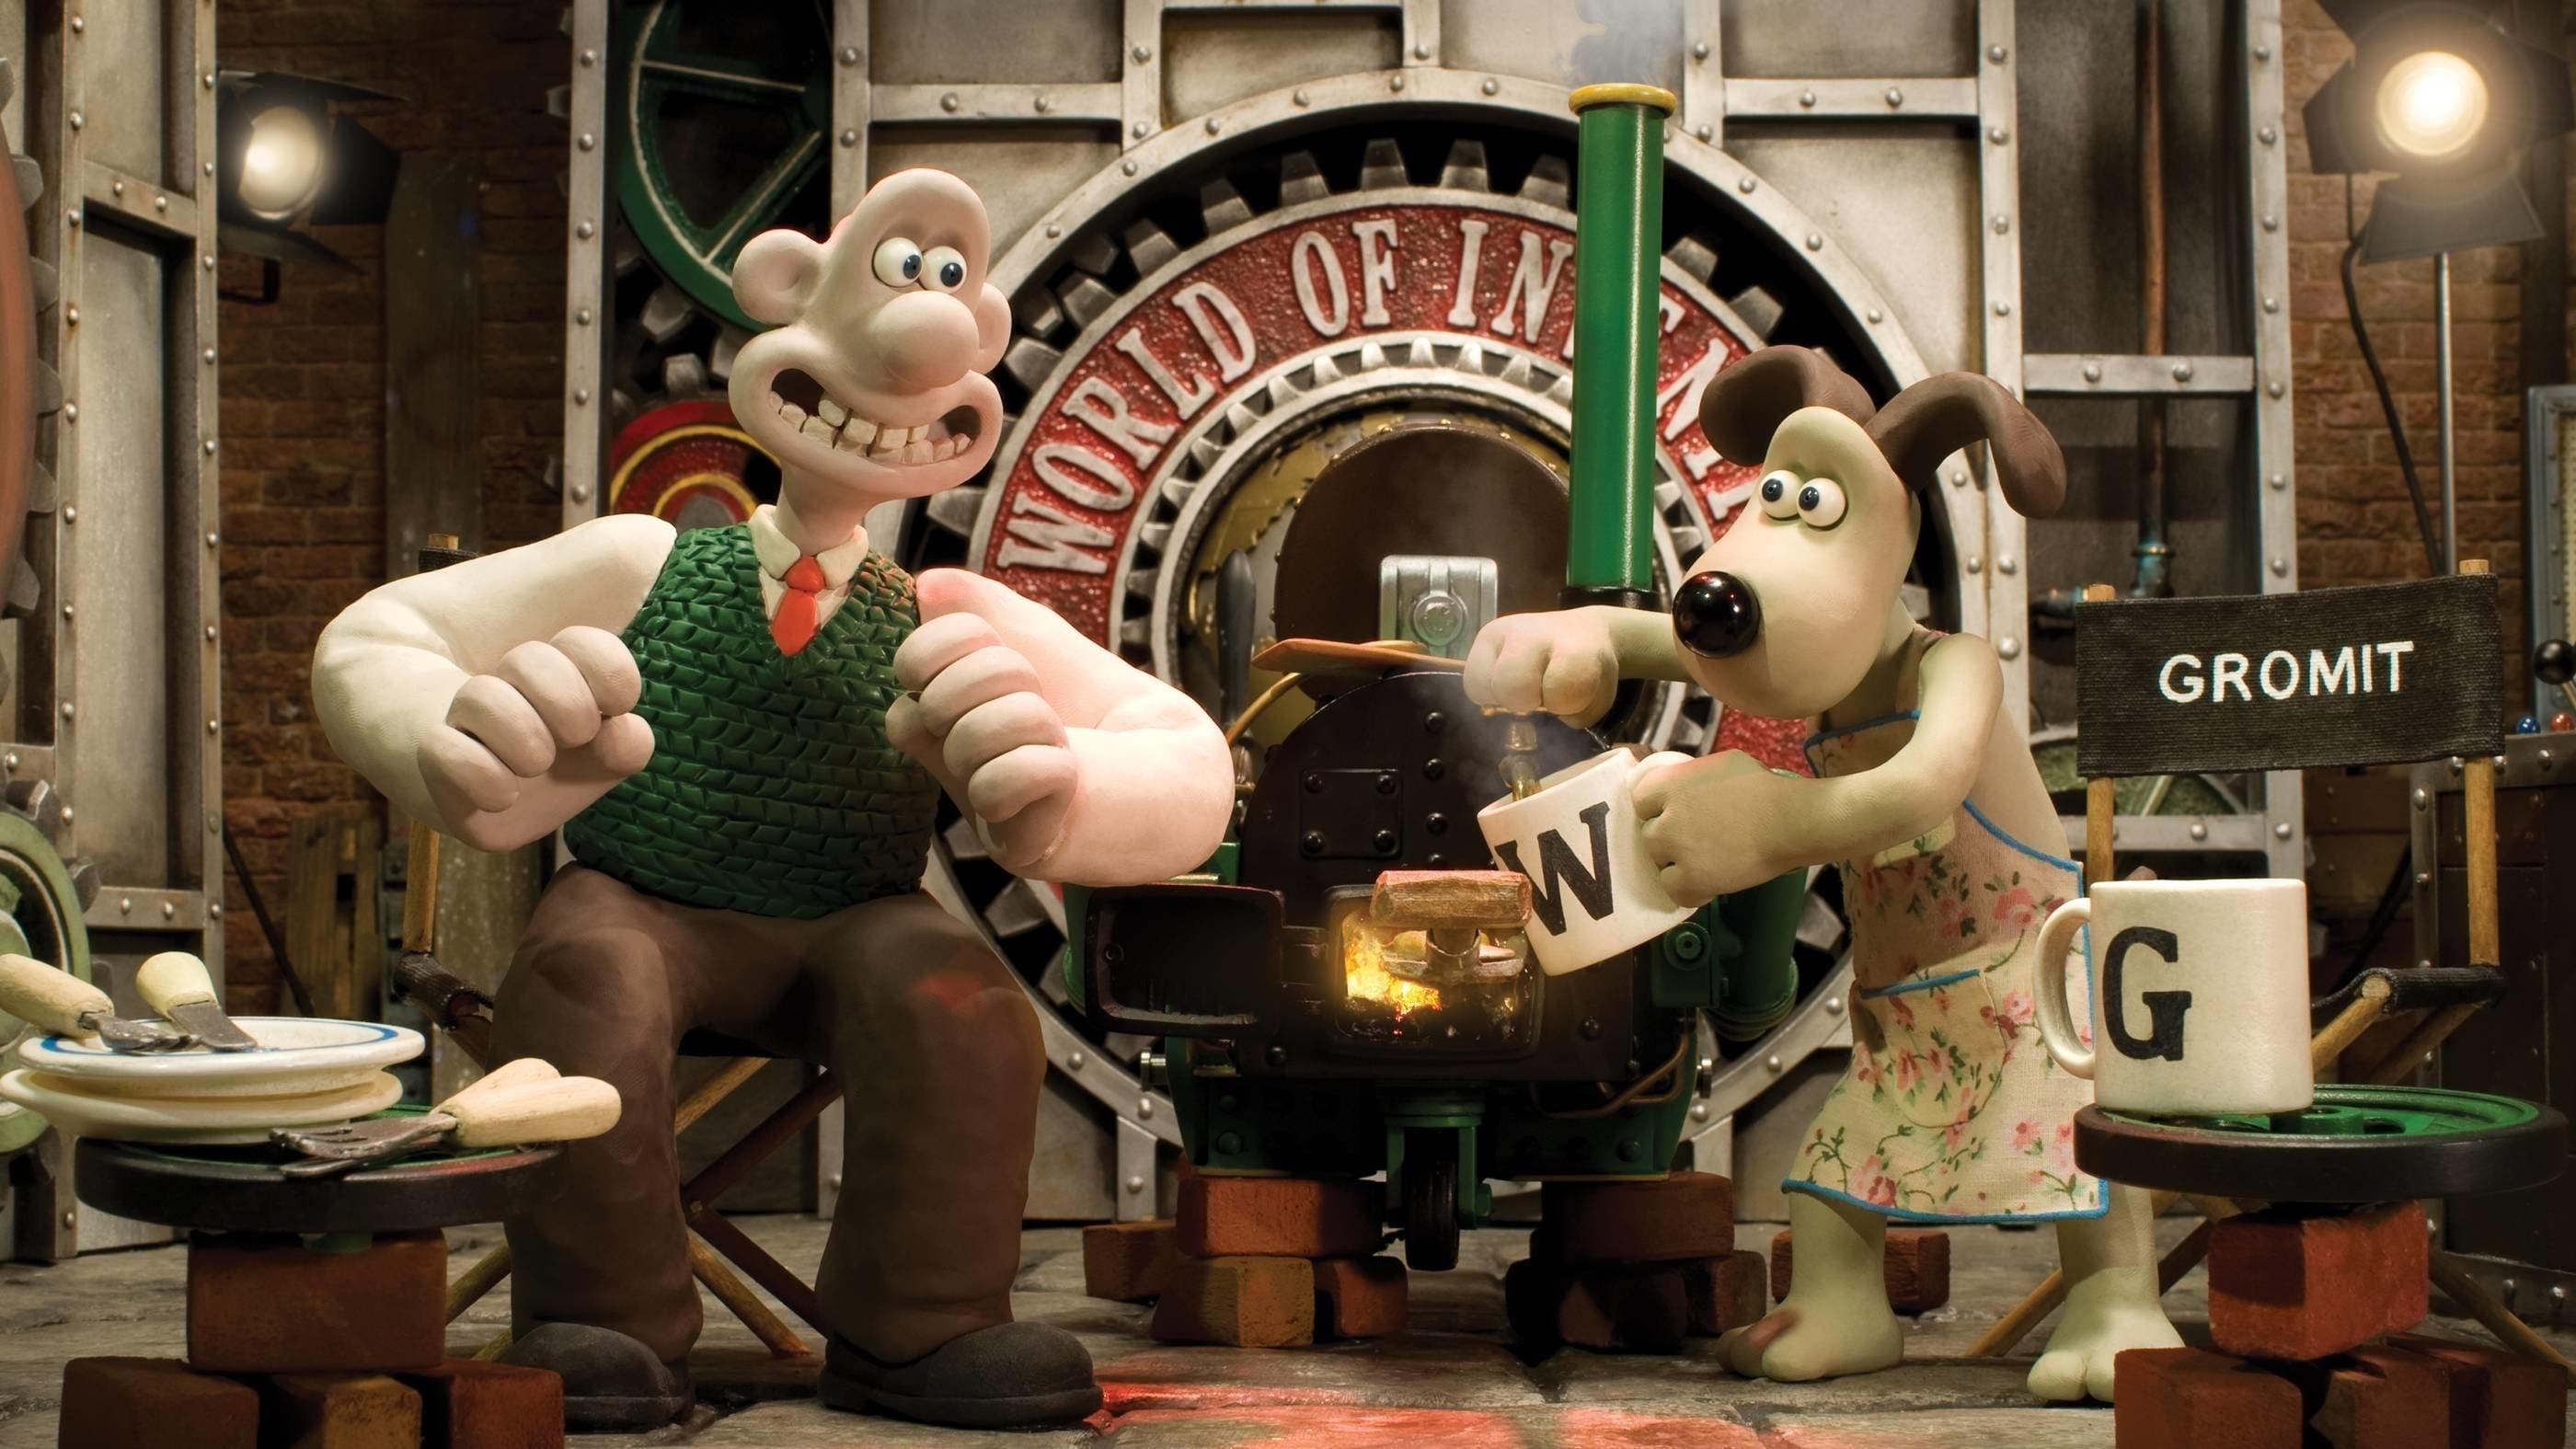 Wallace & Gromit's World of Invention backdrop